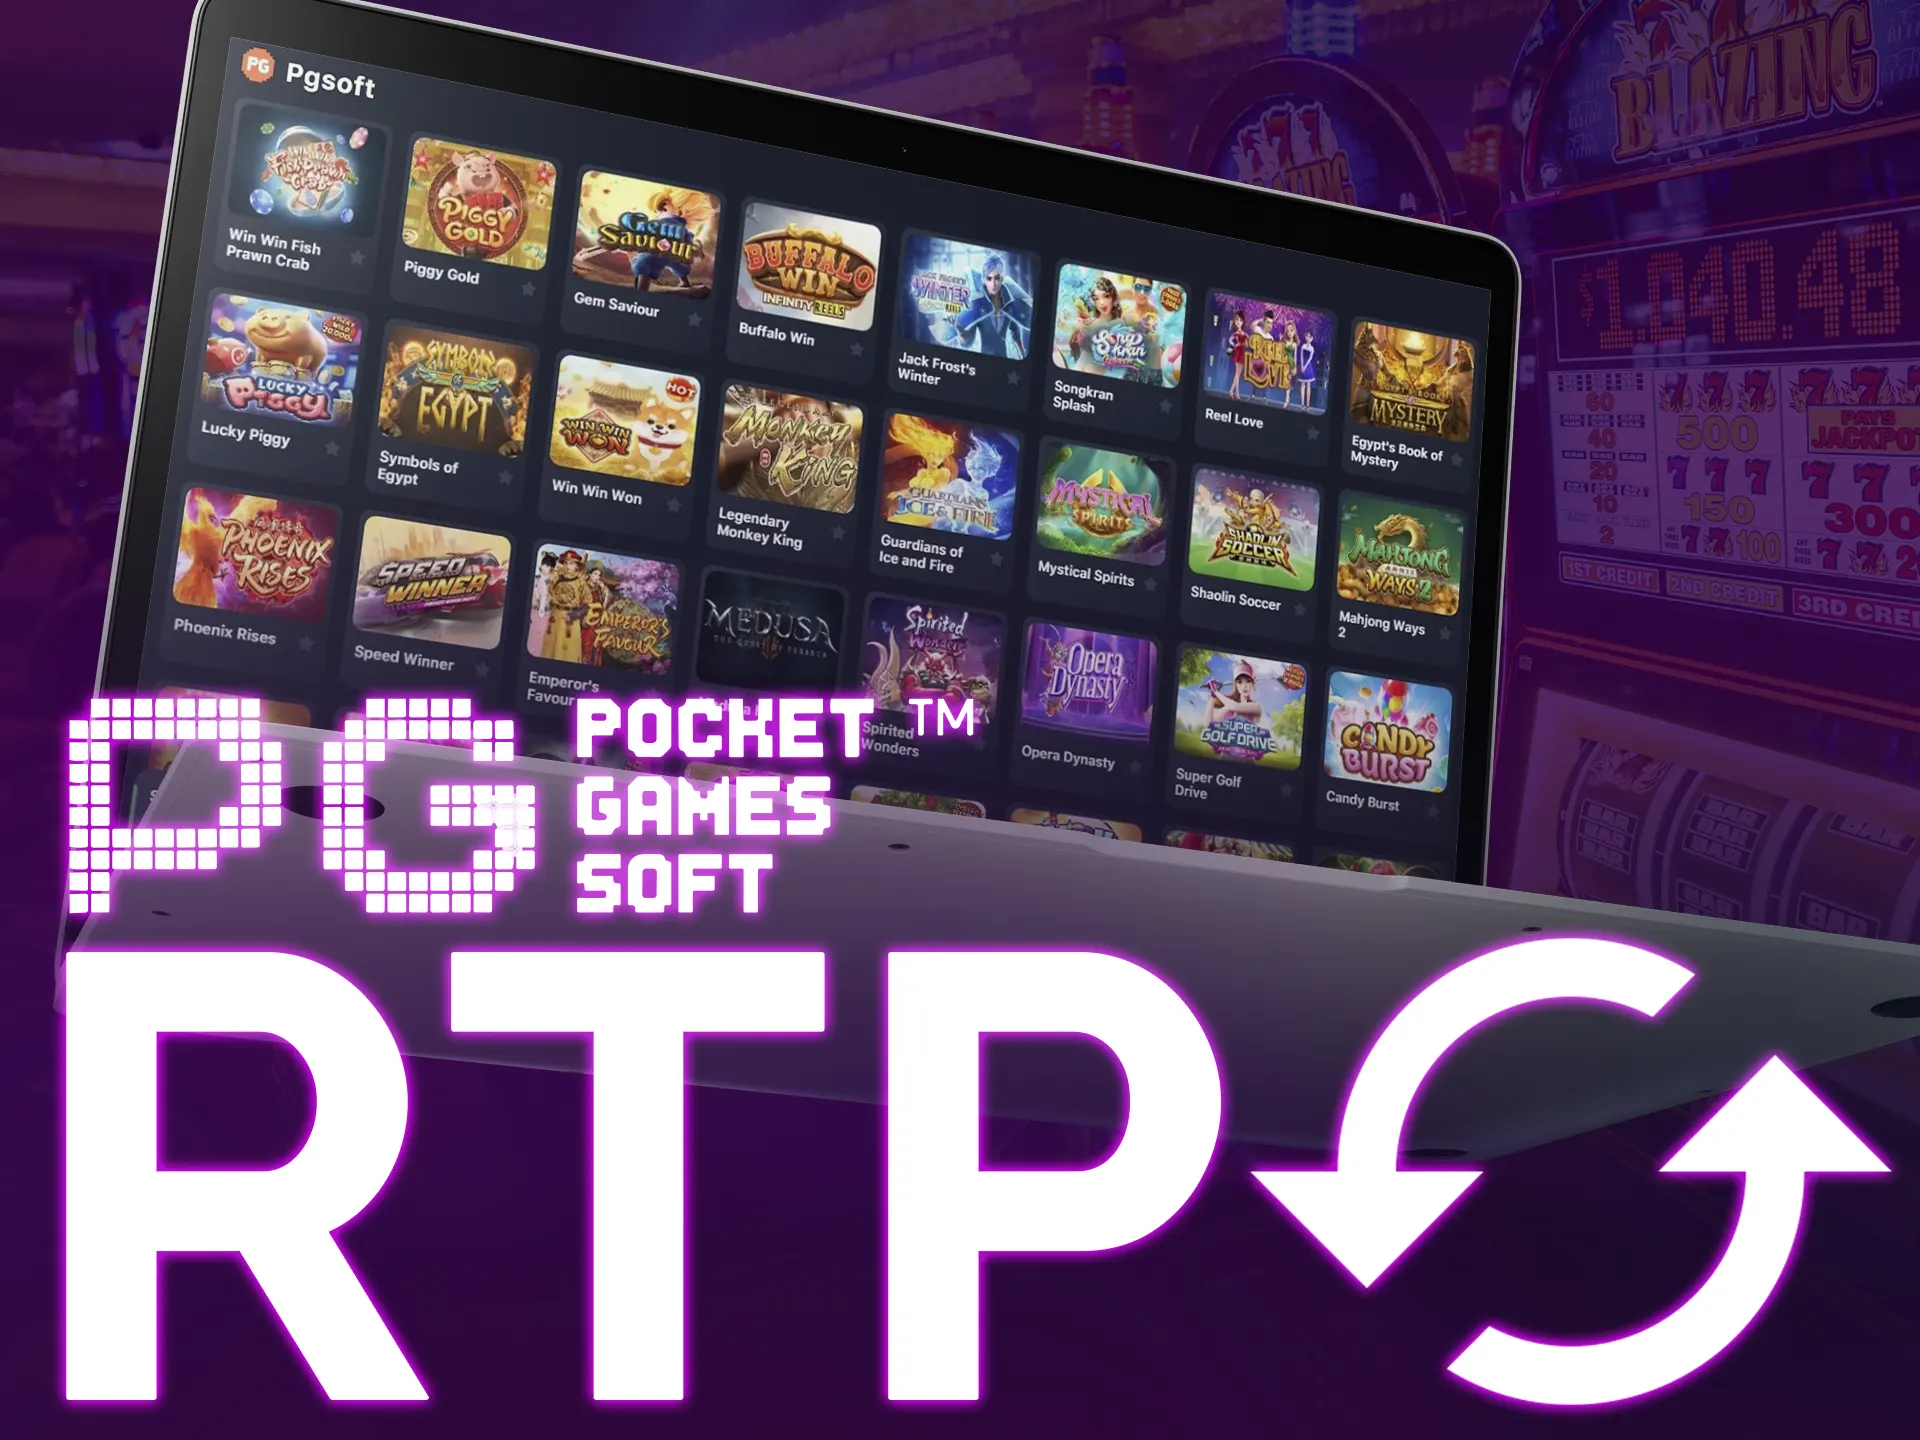 PG Soft slots offer high RTP, averaging around 96%, with games like Queen of Bounty boasting 96.8%.